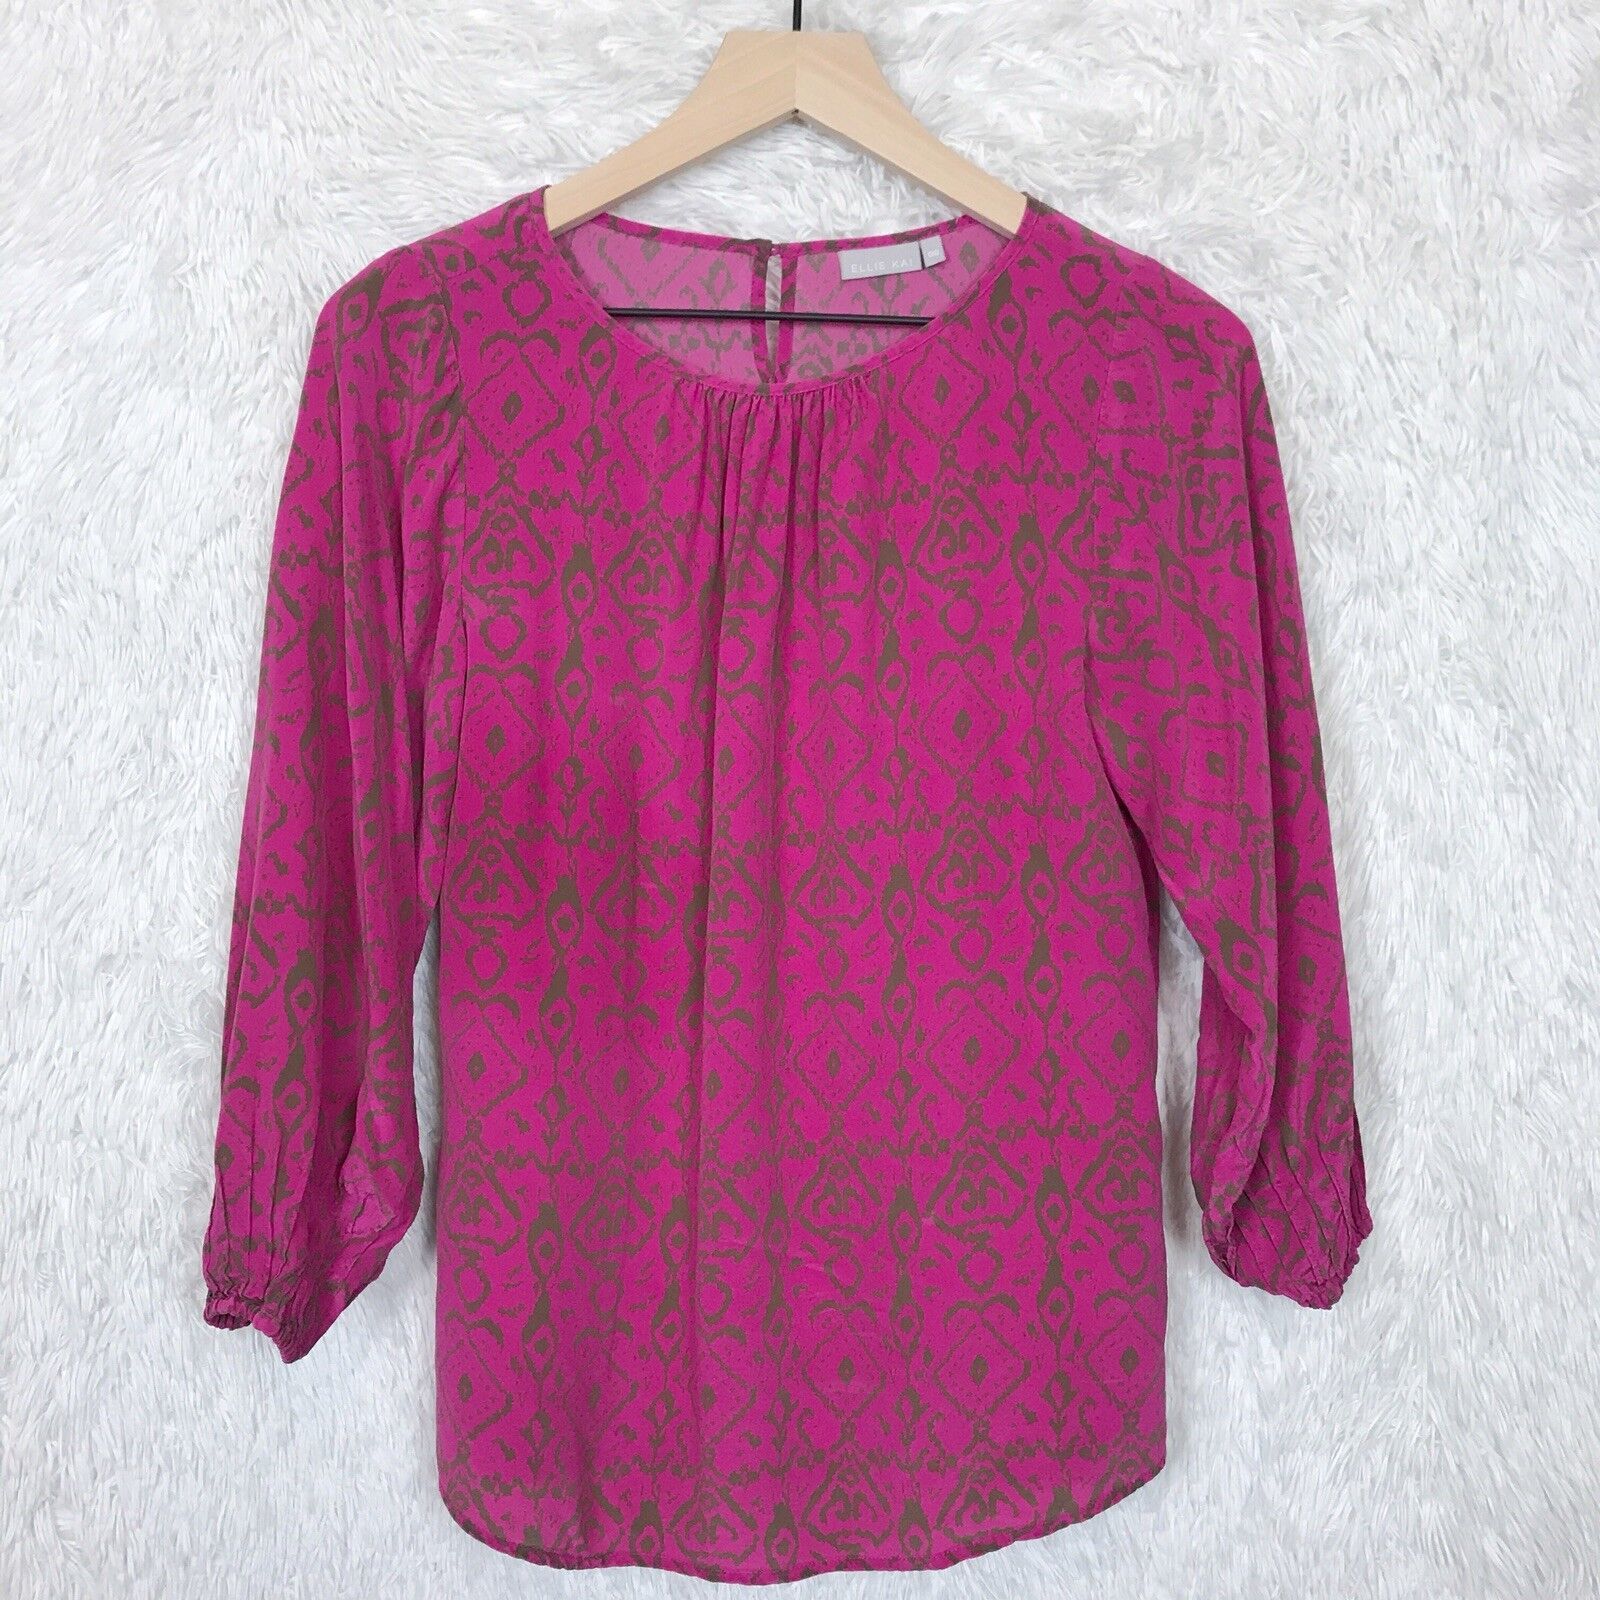 Primary image for Ellie Kai Pure Silk Peasant Blouse Pink Brown Ikat 3/4 Sleeve Womens 00 XXS